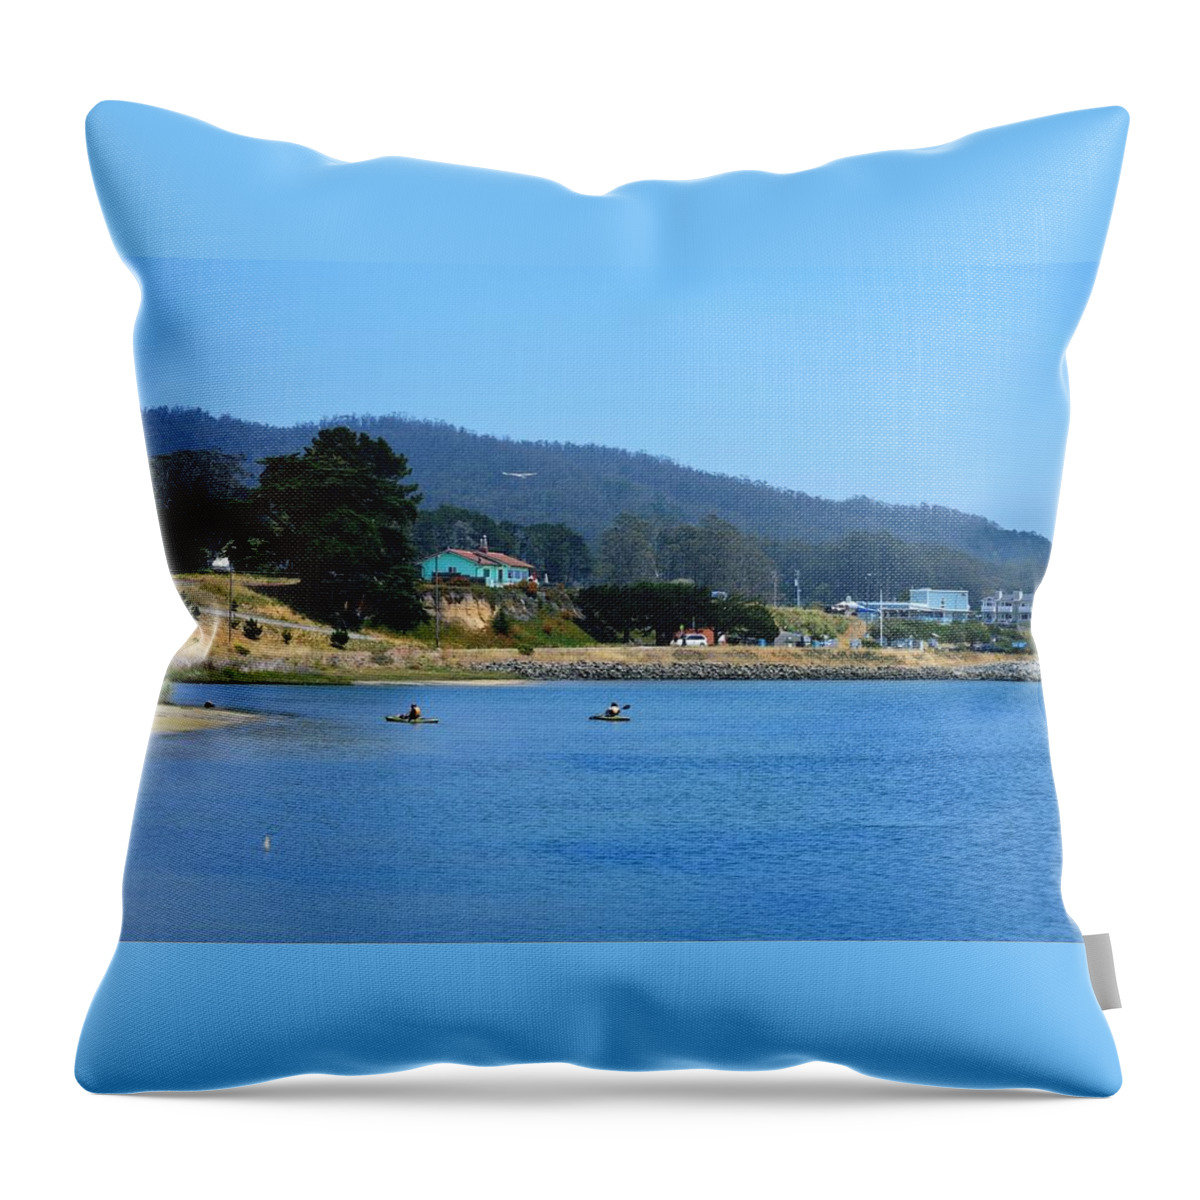 Landsccape Throw Pillow featuring the photograph Pillar Point Harbor by Marian Jenkins